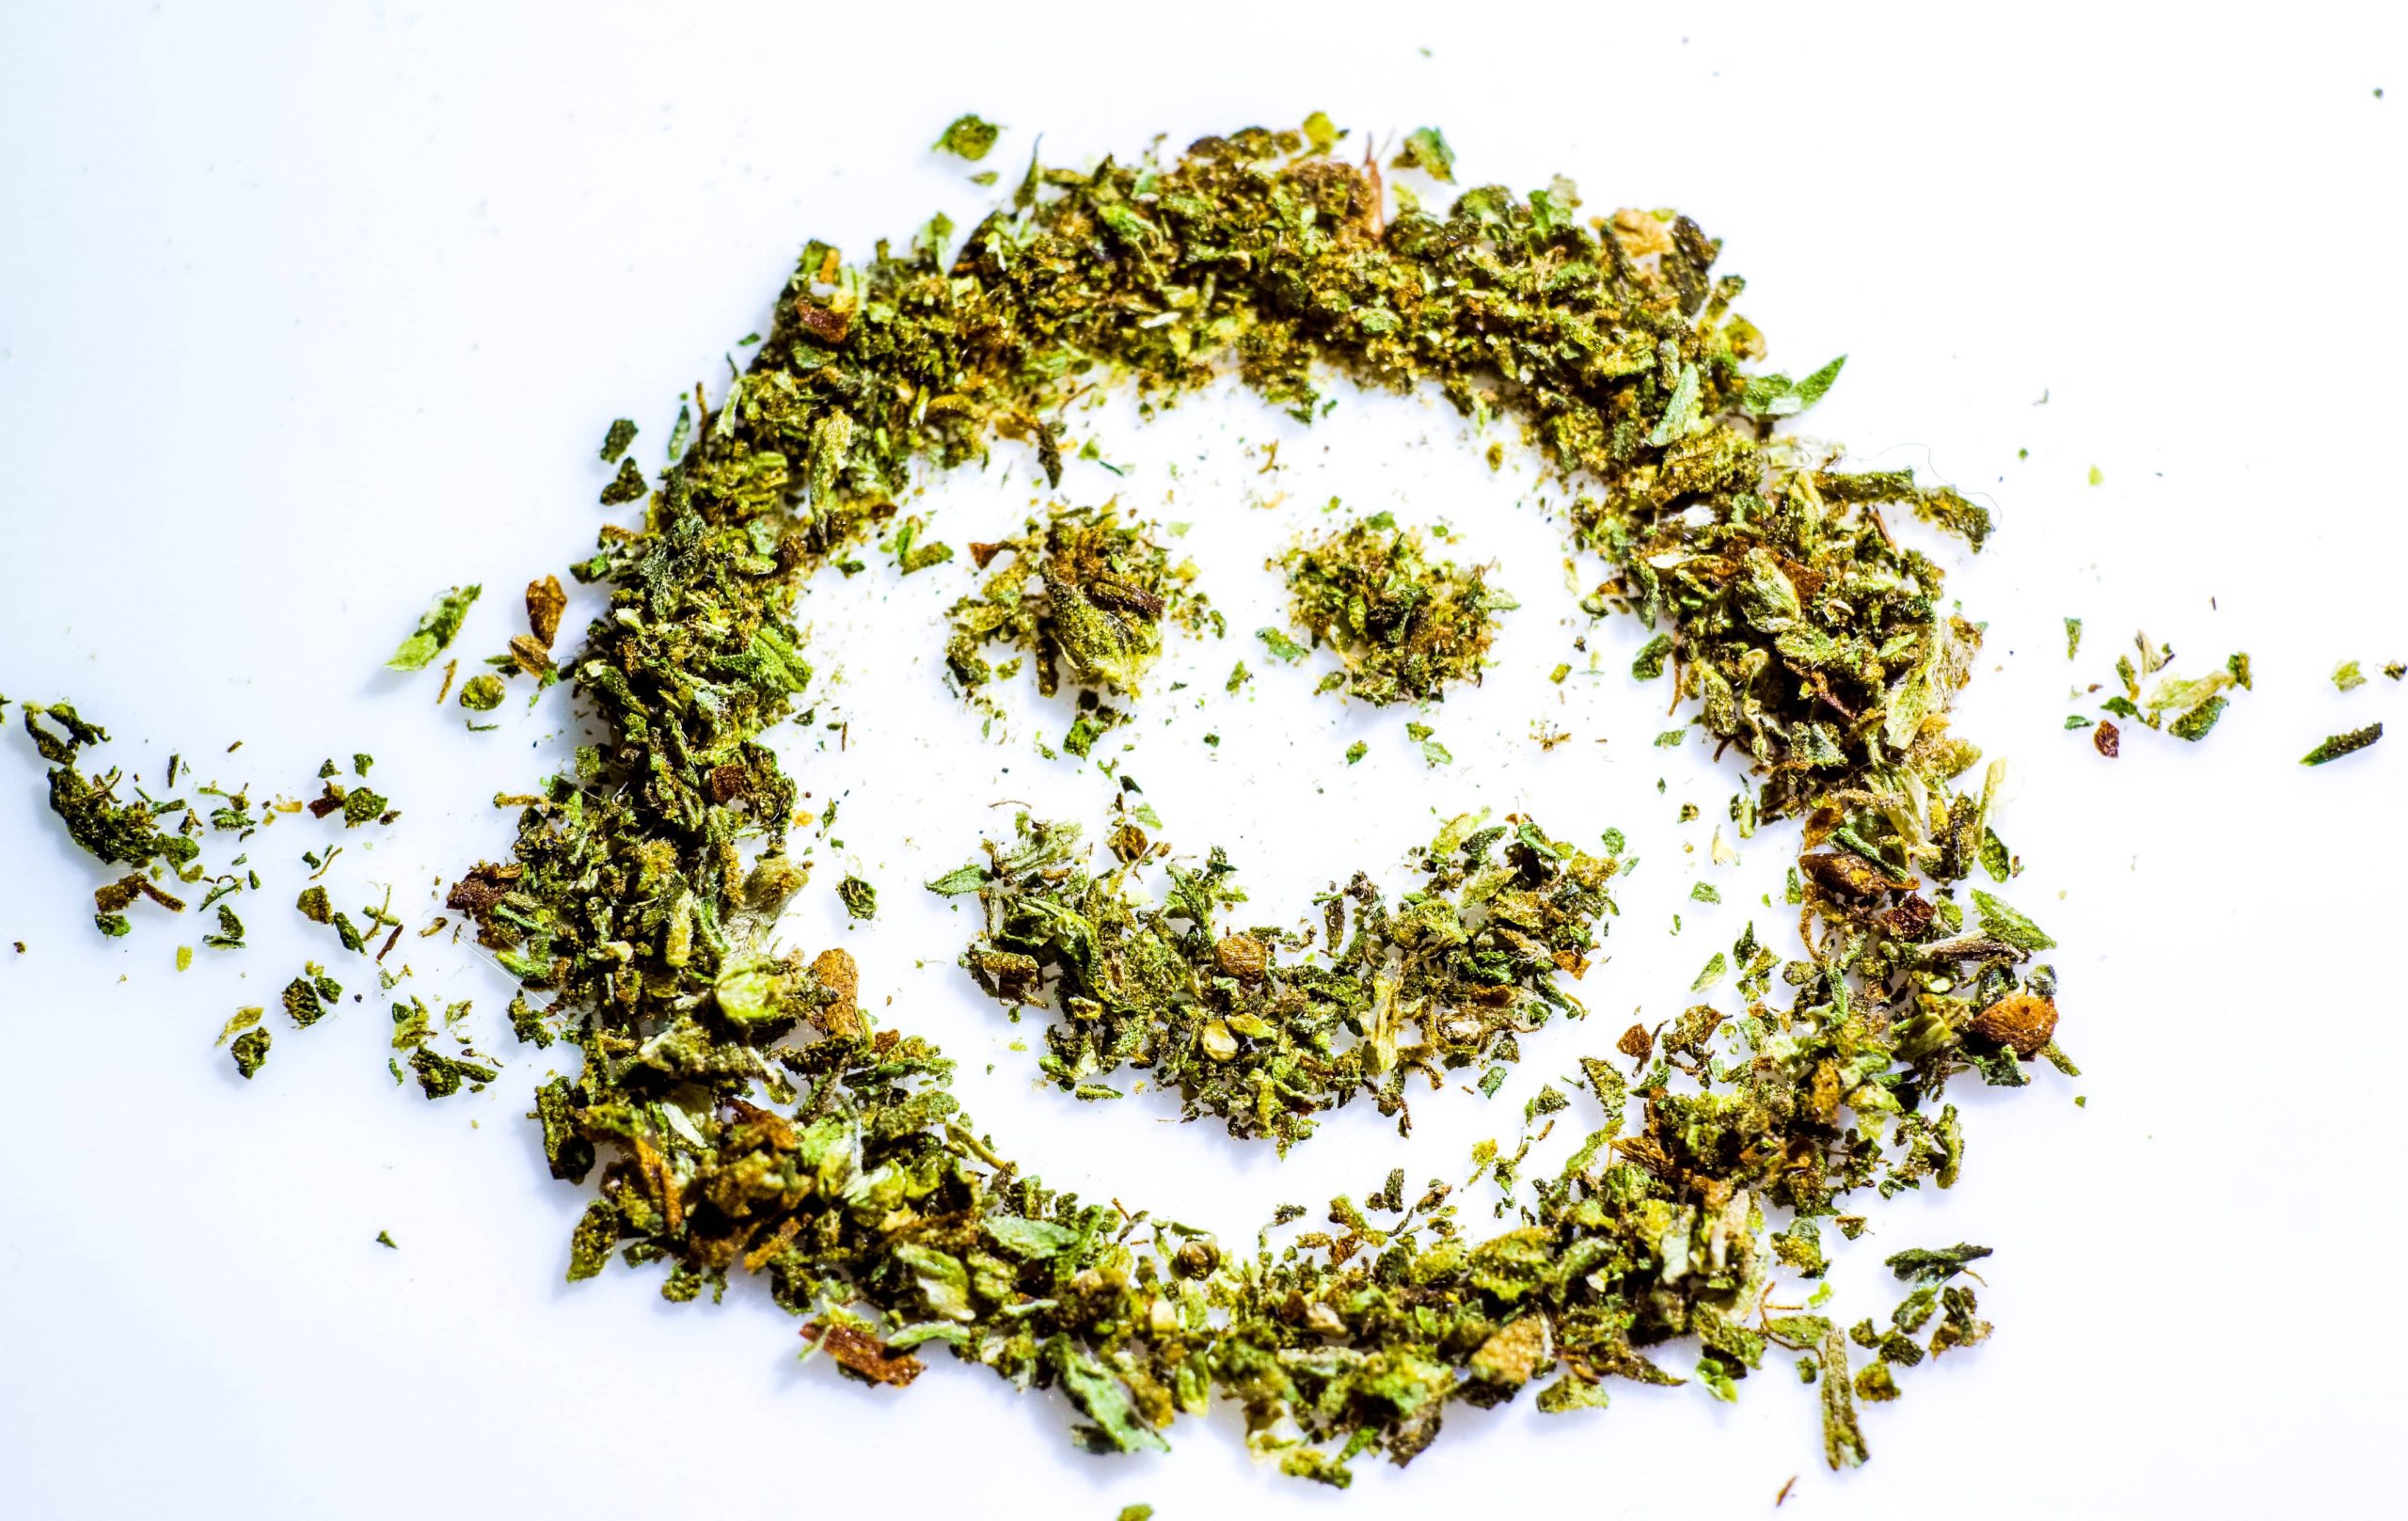 People With First-Hand Experience More Likely to Perceive Pot Positively